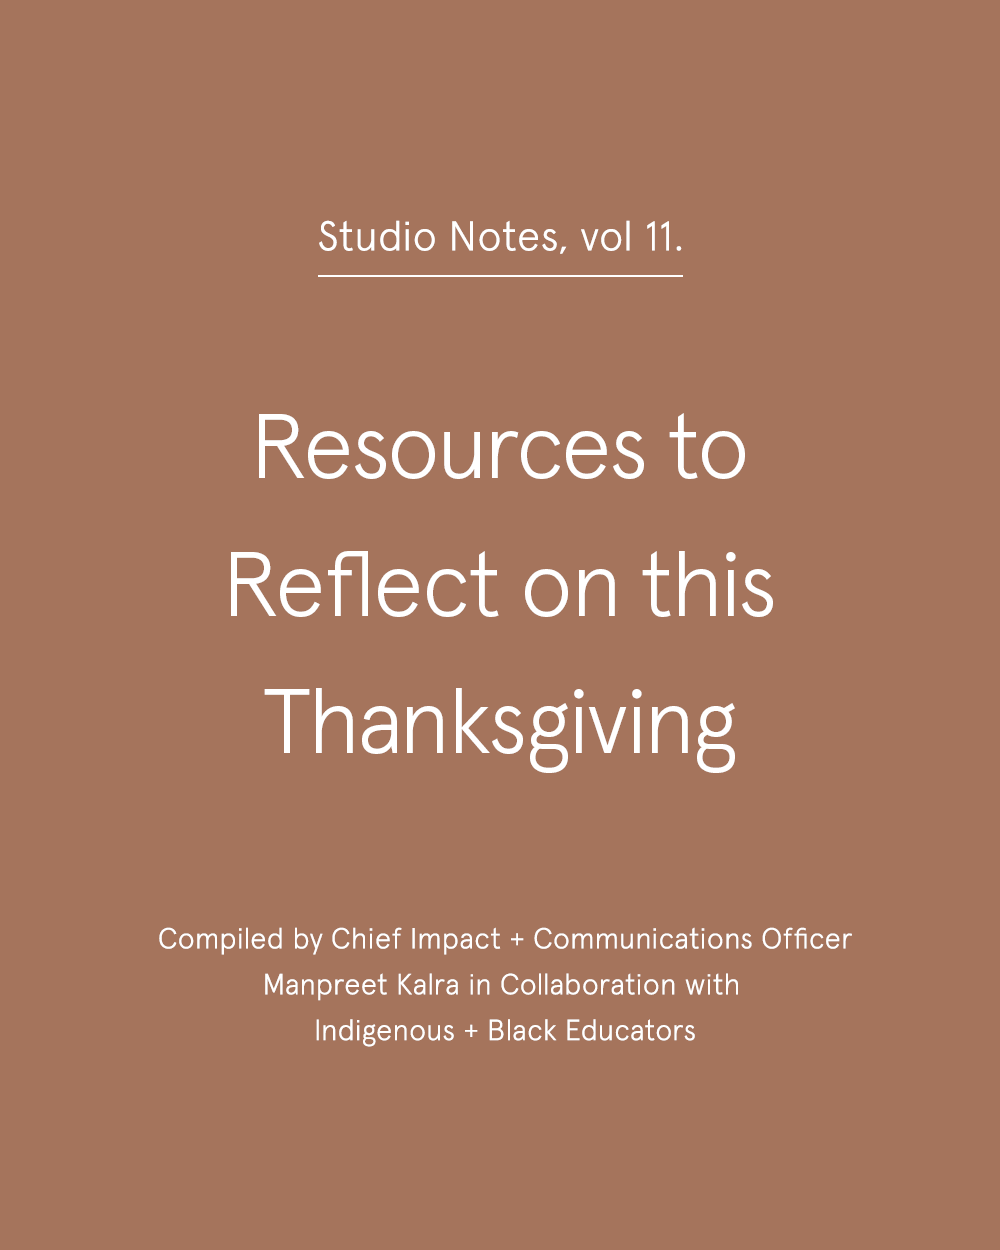 Resources to Reflect on this Thanksgiving